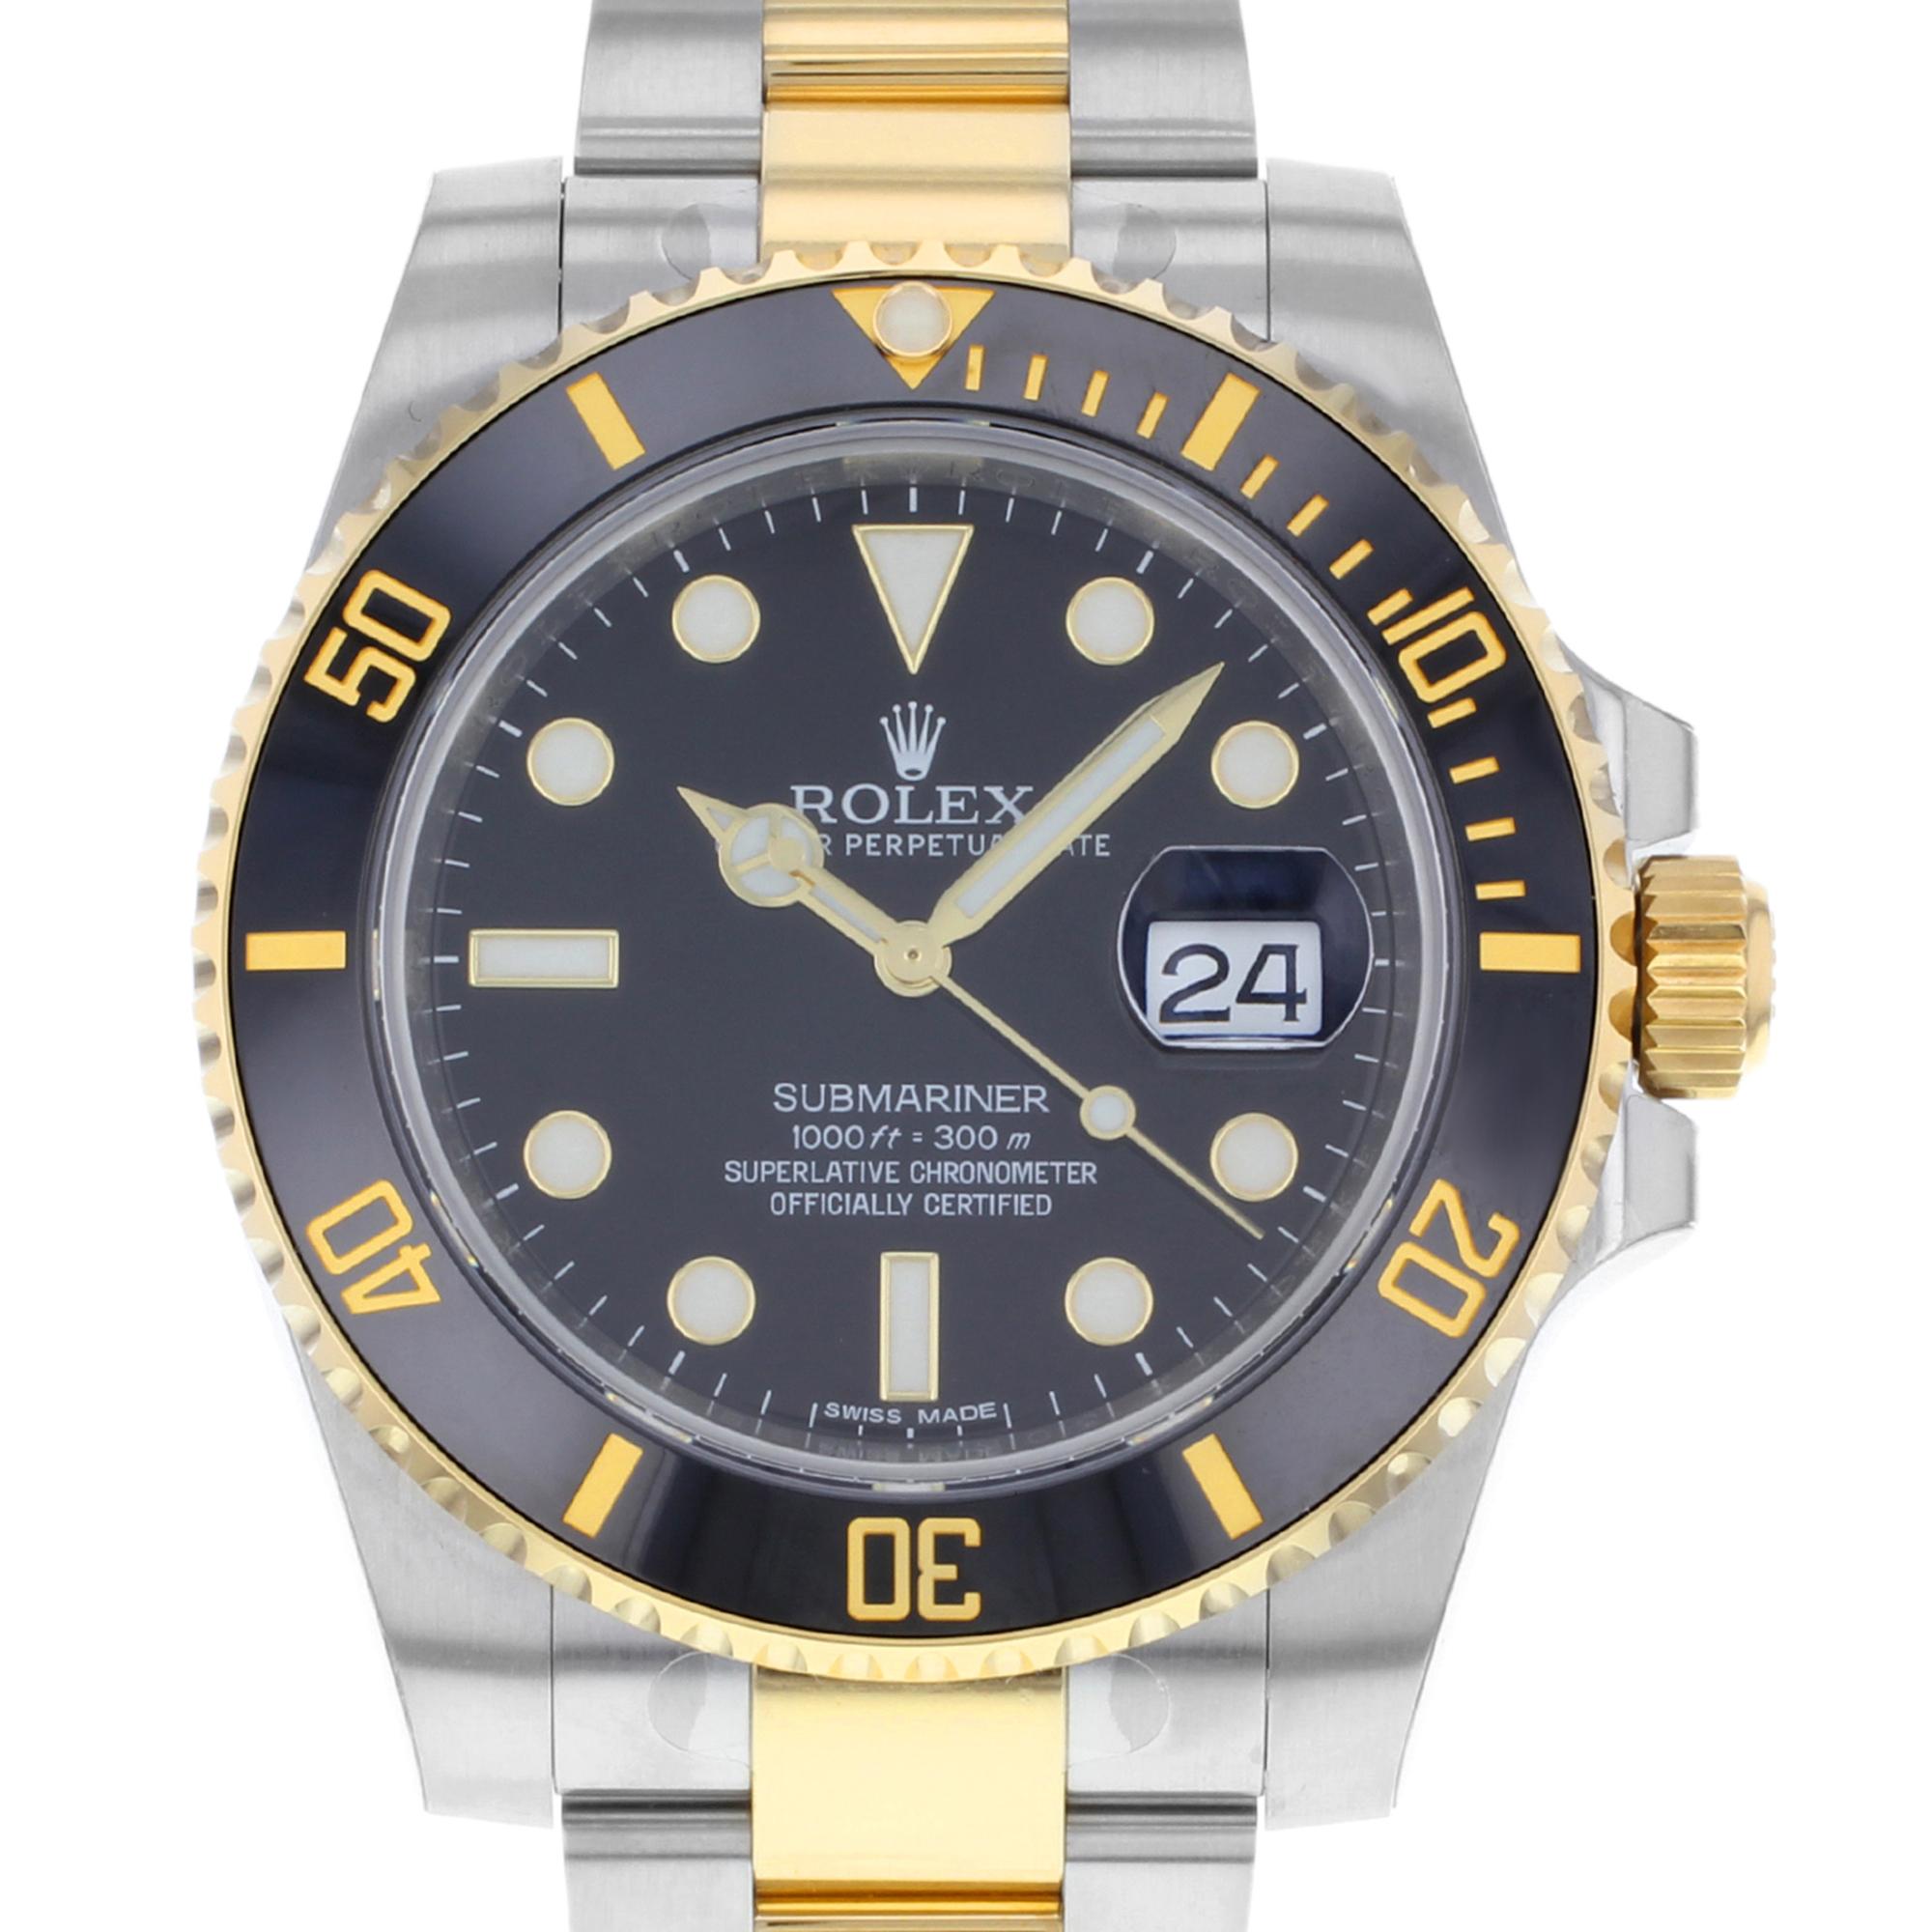 This brand new Rolex Submariner 116613LN is a beautiful men's timepiece that is powered by an automatic movement which is cased in a stainless steel case. It has a round shape face, date dial and has hand sticks & dots style markers. It is completed